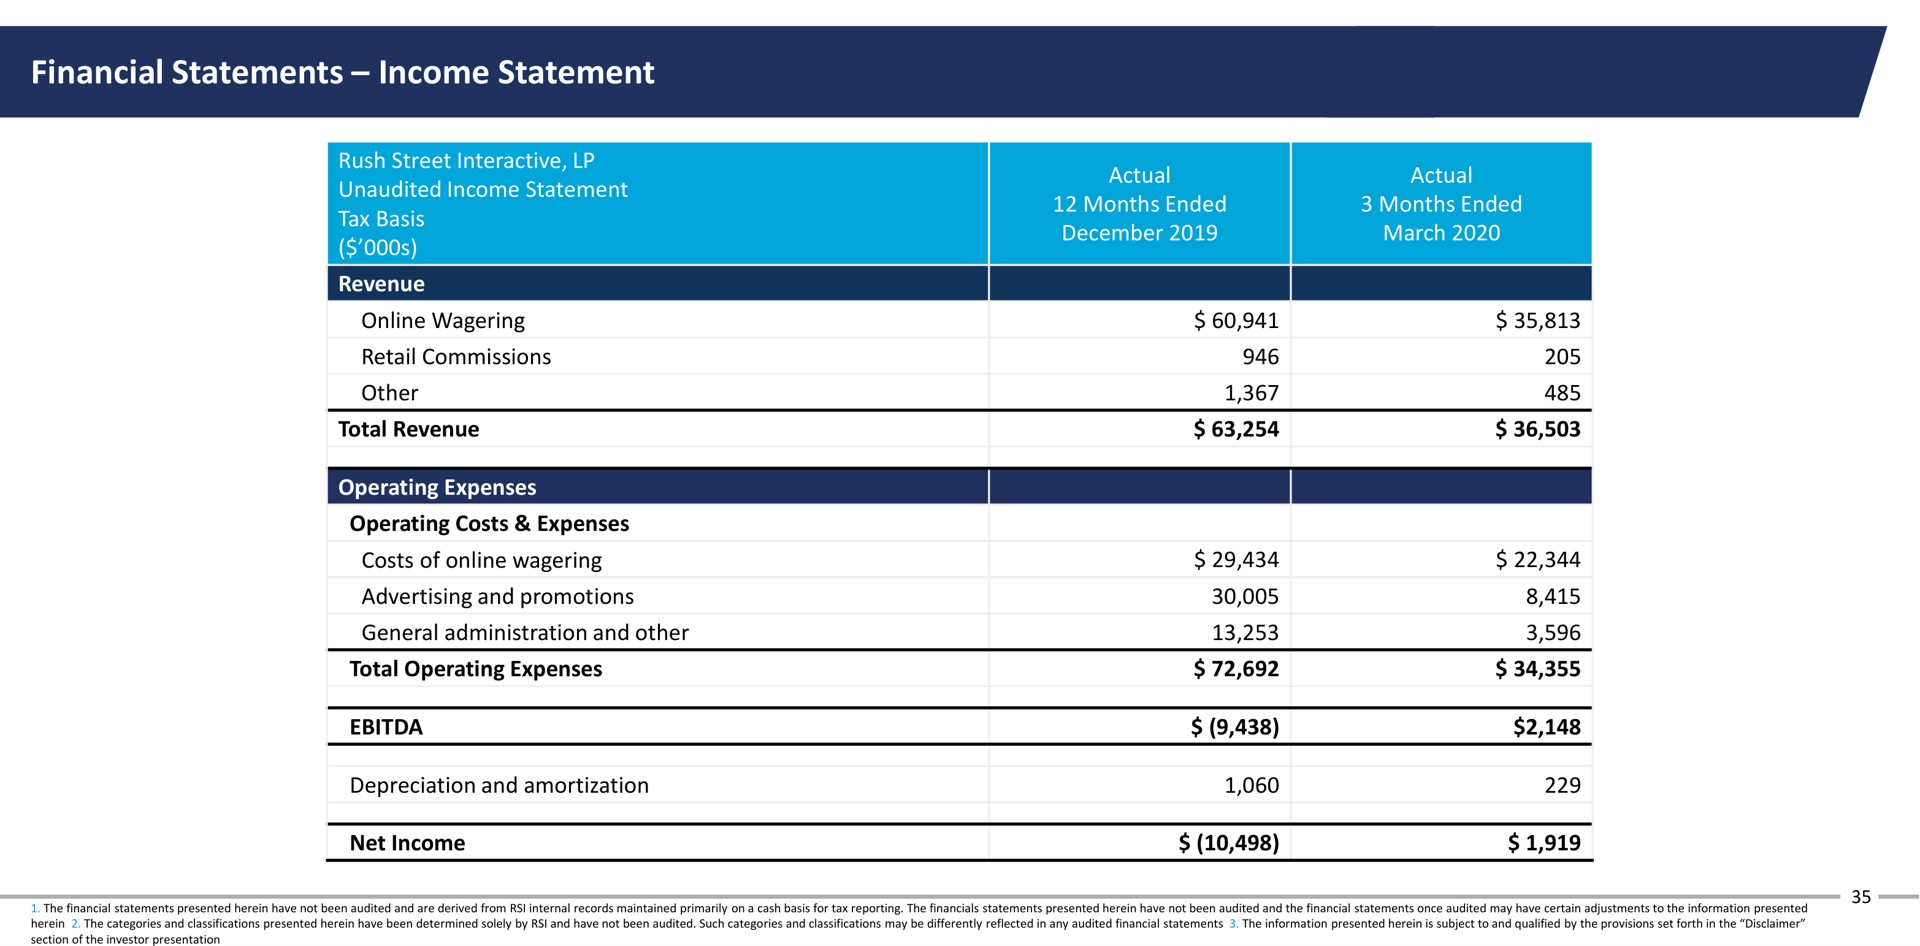 financial statements income statement a | Rush Street